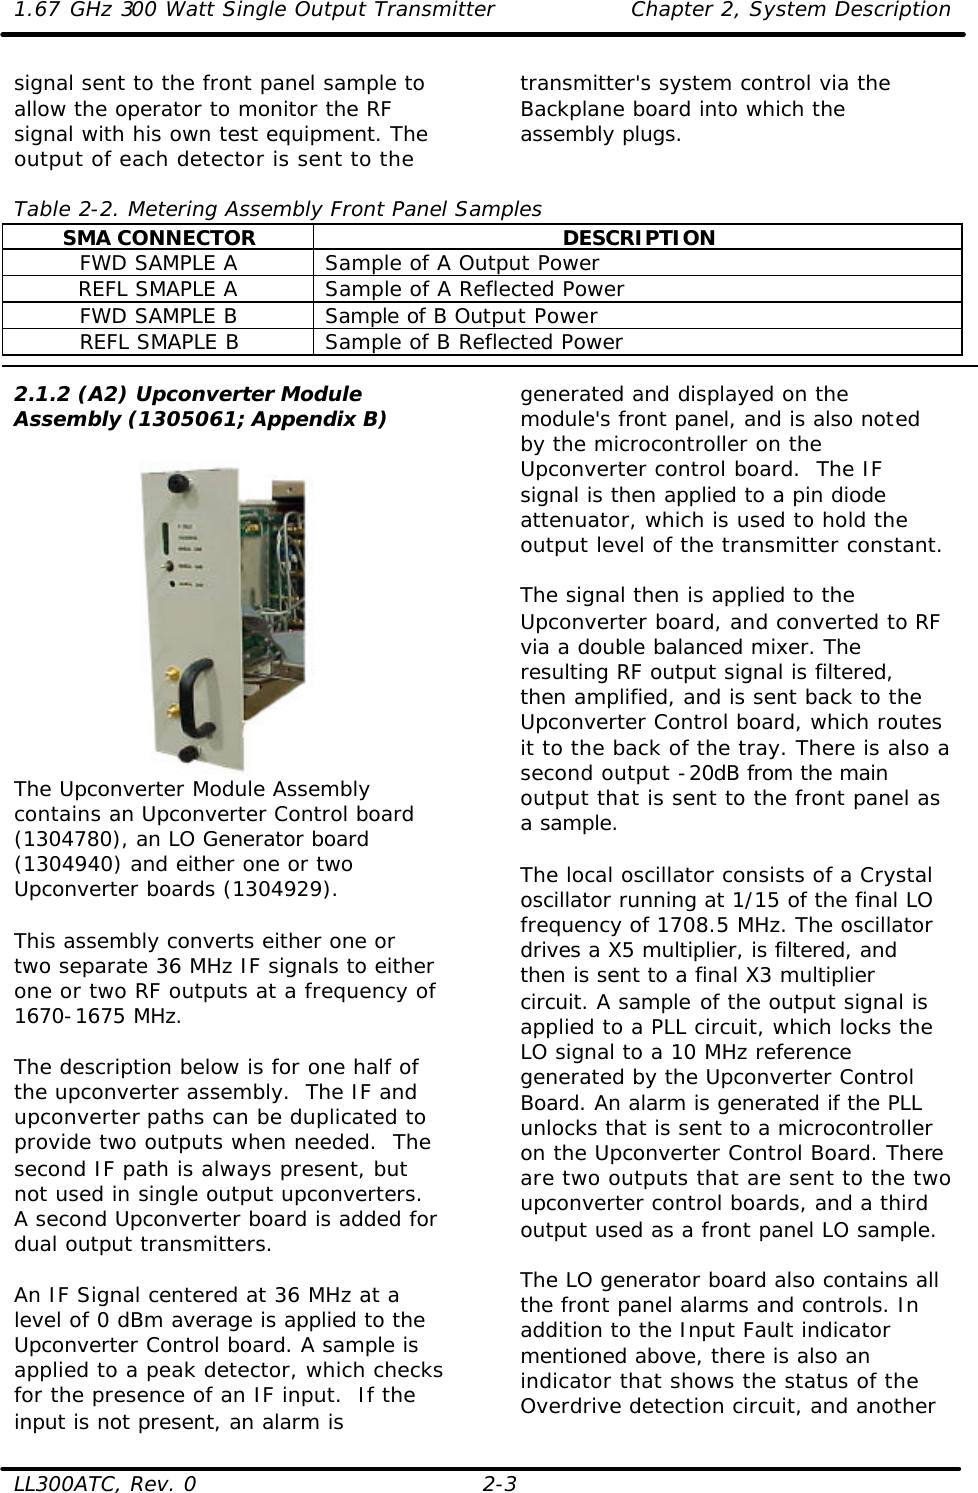 1.67 GHz 300 Watt Single Output Transmitter Chapter 2, System Description  LL300ATC, Rev. 0 2-3 signal sent to the front panel sample to allow the operator to monitor the RF signal with his own test equipment. The output of each detector is sent to the transmitter&apos;s system control via the Backplane board into which the assembly plugs.   Table 2-2. Metering Assembly Front Panel Samples SMA CONNECTOR DESCRIPTION FWD SAMPLE A Sample of A Output Power REFL SMAPLE A Sample of A Reflected Power FWD SAMPLE B Sample of B Output Power REFL SMAPLE B Sample of B Reflected Power  2.1.2 (A2) Upconverter Module Assembly (1305061; Appendix B)   The Upconverter Module Assembly contains an Upconverter Control board (1304780), an LO Generator board (1304940) and either one or two Upconverter boards (1304929).  This assembly converts either one or two separate 36 MHz IF signals to either one or two RF outputs at a frequency of 1670-1675 MHz.  The description below is for one half of the upconverter assembly.  The IF and upconverter paths can be duplicated to provide two outputs when needed.  The second IF path is always present, but not used in single output upconverters. A second Upconverter board is added for dual output transmitters.  An IF Signal centered at 36 MHz at a level of 0 dBm average is applied to the Upconverter Control board. A sample is applied to a peak detector, which checks for the presence of an IF input.  If the input is not present, an alarm is generated and displayed on the module&apos;s front panel, and is also noted by the microcontroller on the Upconverter control board.  The IF signal is then applied to a pin diode attenuator, which is used to hold the output level of the transmitter constant.   The signal then is applied to the Upconverter board, and converted to RF via a double balanced mixer. The resulting RF output signal is filtered, then amplified, and is sent back to the Upconverter Control board, which routes it to the back of the tray. There is also a second output -20dB from the main output that is sent to the front panel as a sample.   The local oscillator consists of a Crystal oscillator running at 1/15 of the final LO frequency of 1708.5 MHz. The oscillator drives a X5 multiplier, is filtered, and then is sent to a final X3 multiplier circuit. A sample of the output signal is applied to a PLL circuit, which locks the LO signal to a 10 MHz reference generated by the Upconverter Control Board. An alarm is generated if the PLL unlocks that is sent to a microcontroller on the Upconverter Control Board. There are two outputs that are sent to the two upconverter control boards, and a third output used as a front panel LO sample.   The LO generator board also contains all the front panel alarms and controls. In addition to the Input Fault indicator mentioned above, there is also an indicator that shows the status of the Overdrive detection circuit, and another 